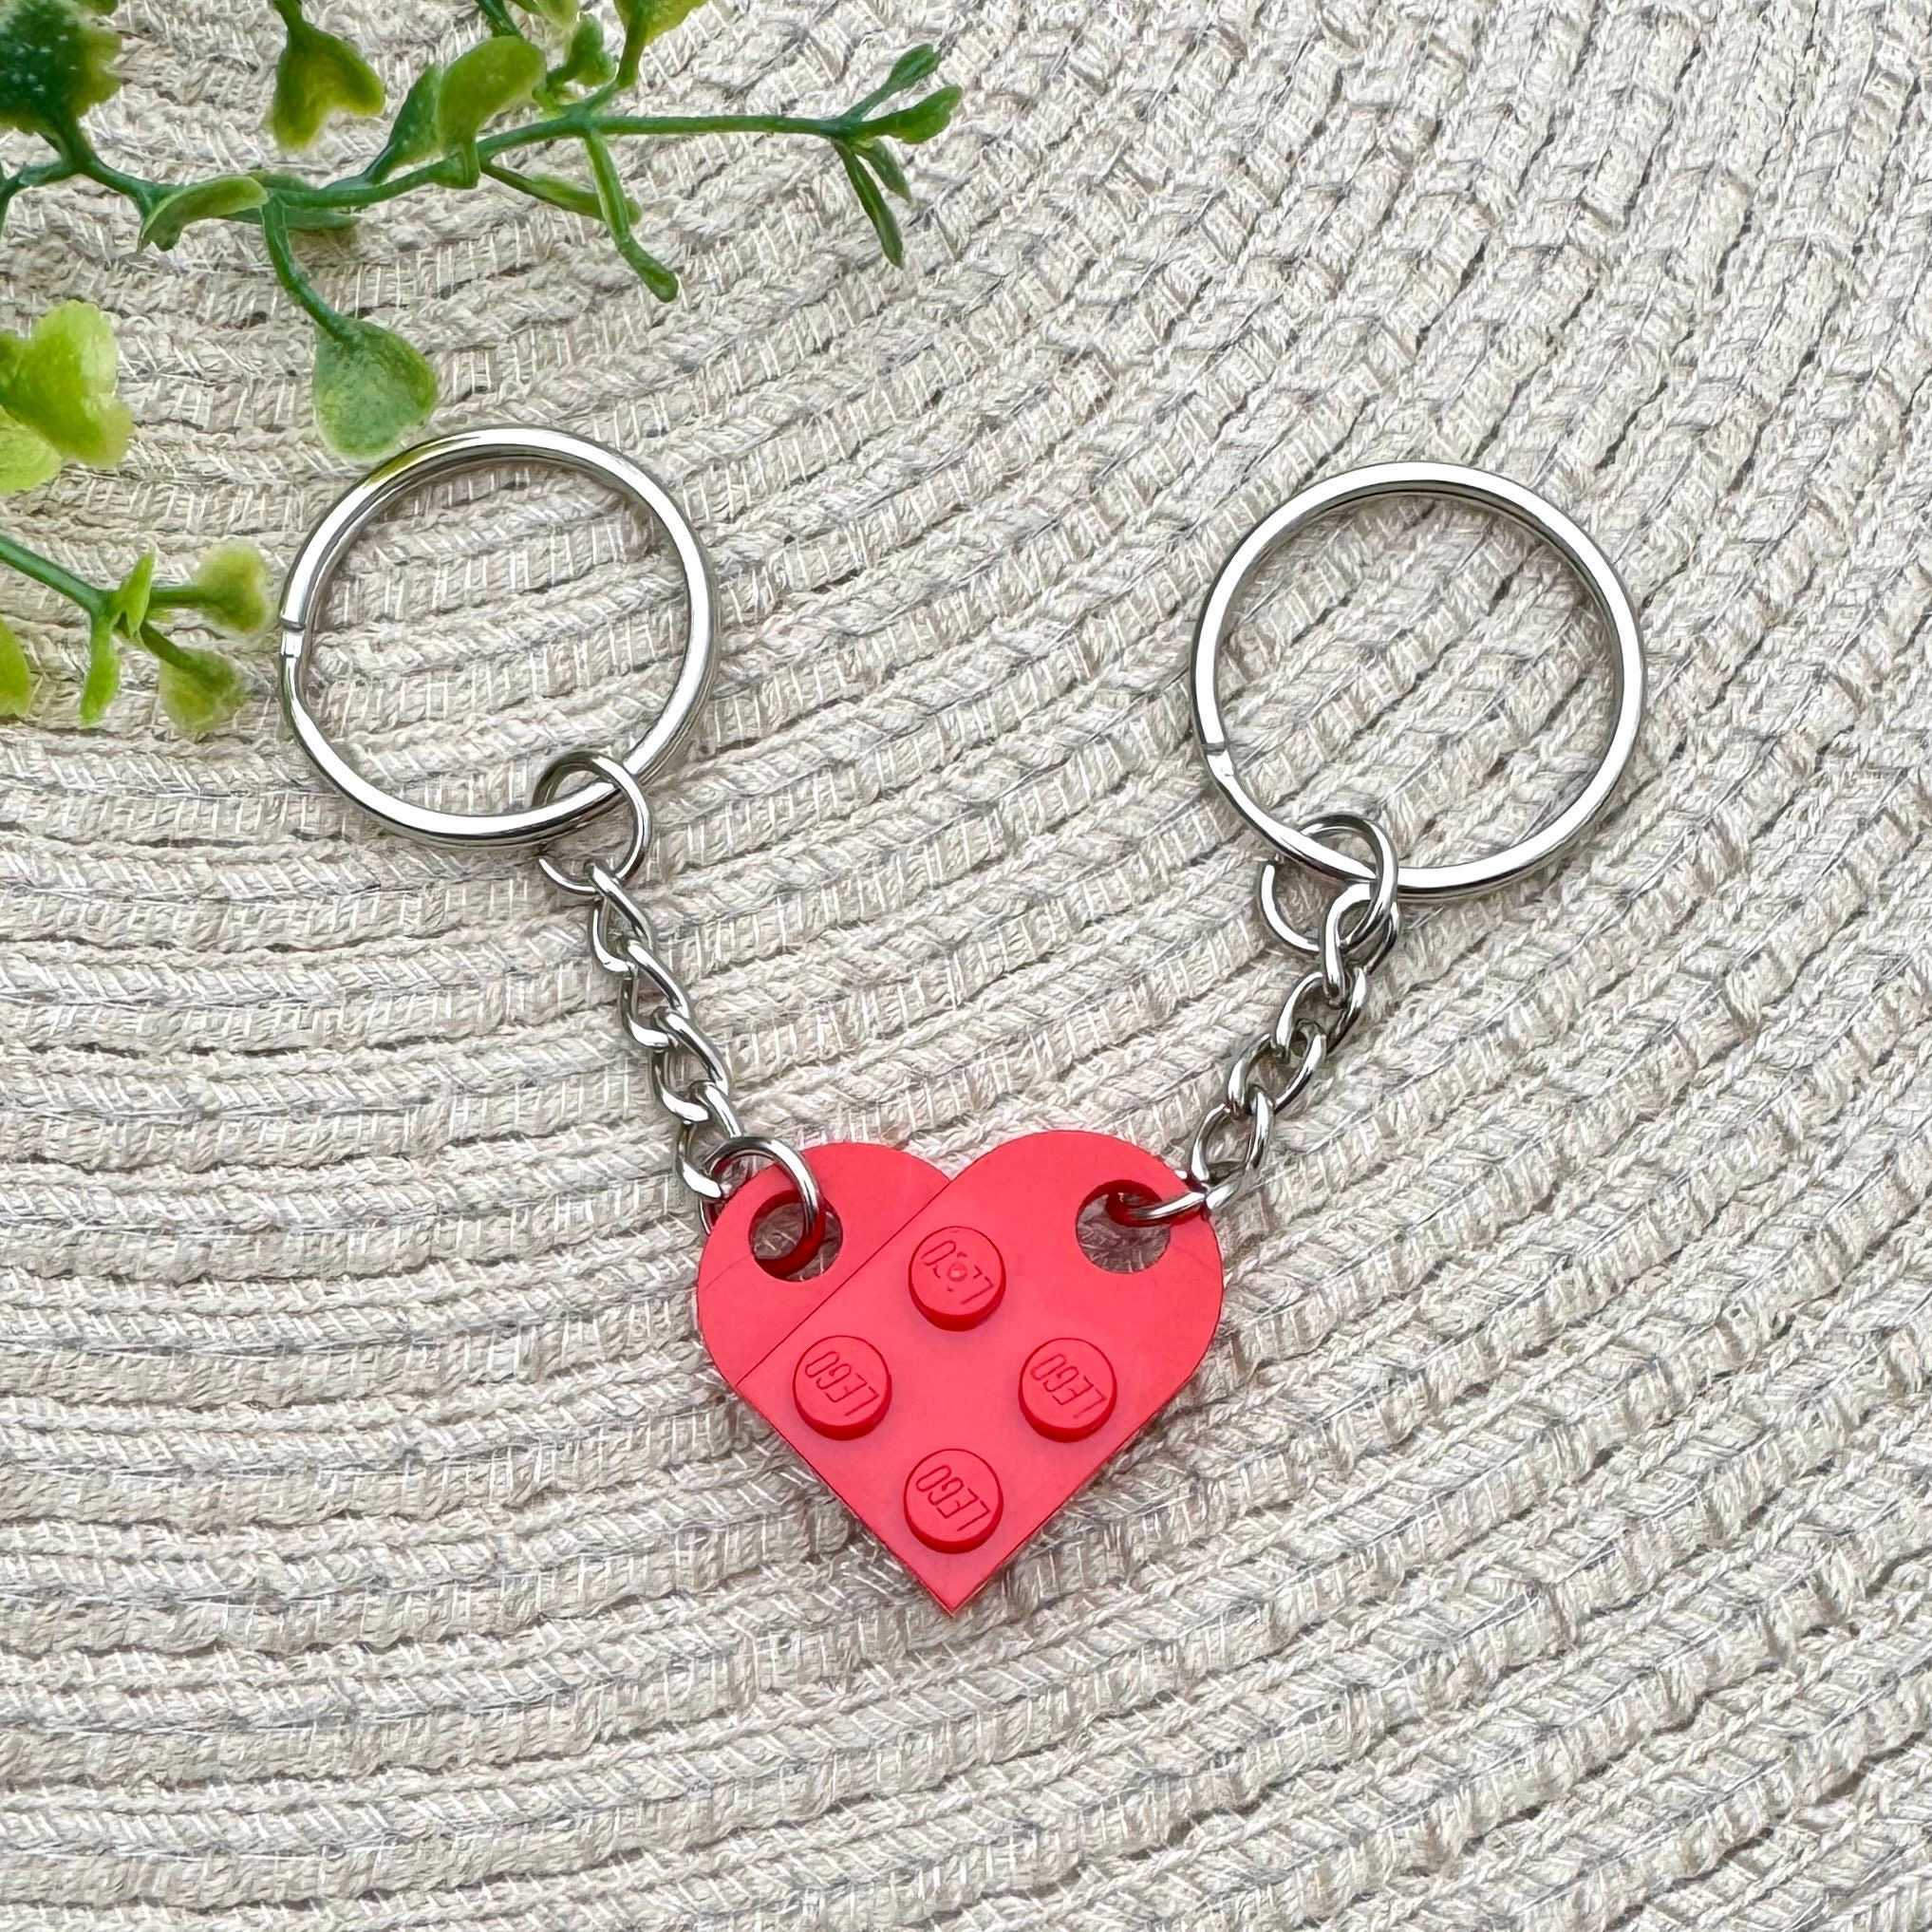 Two Souls One Heart Personalized Couples Key Chain